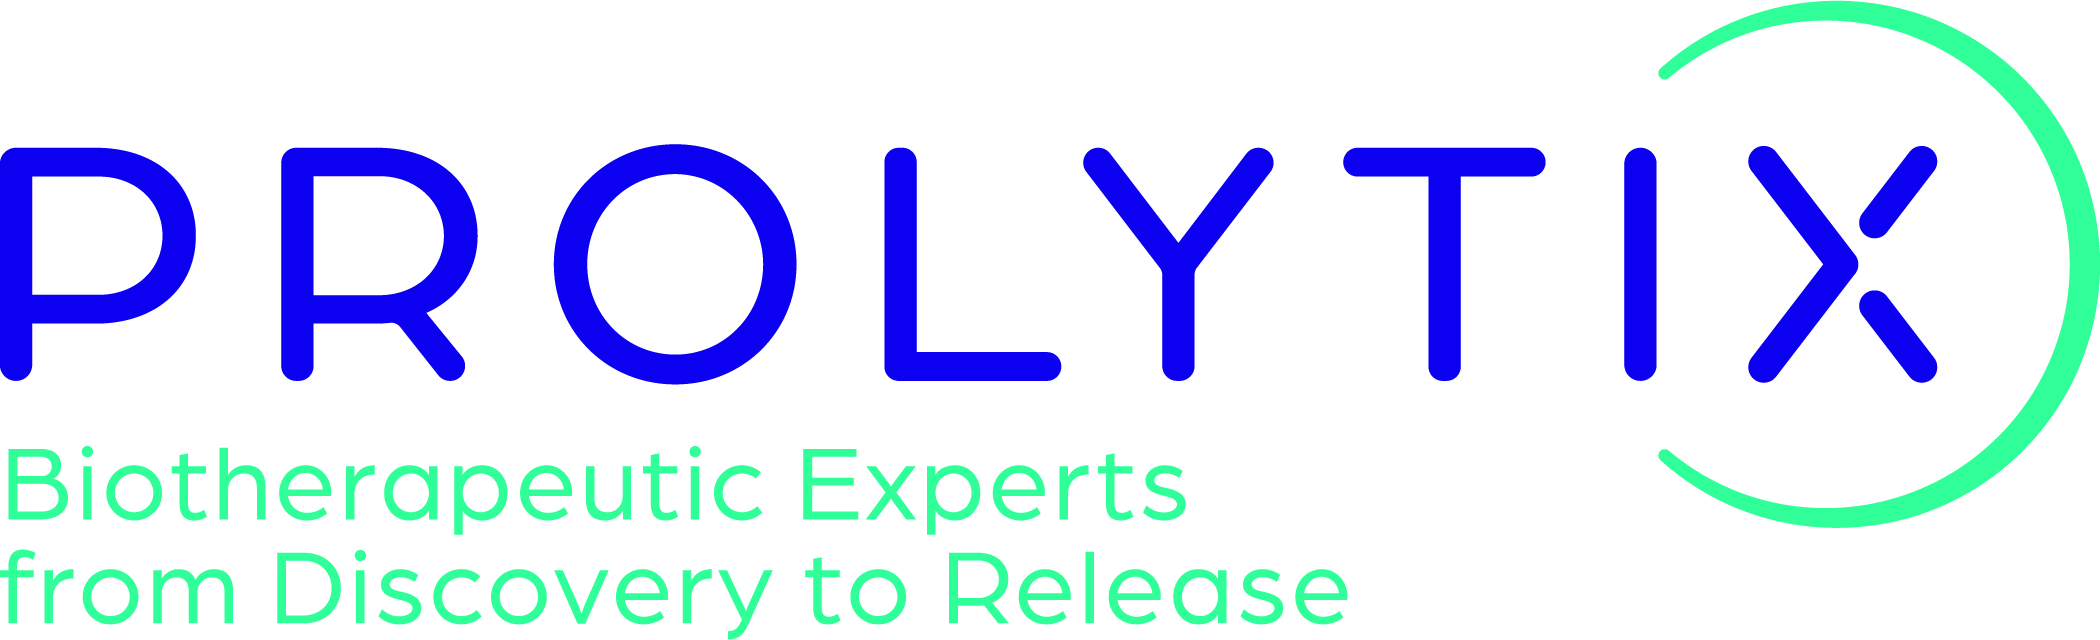 Haematologic Technologies Is Now Prolytix, Integrating to Support Growing Large Molecule Market